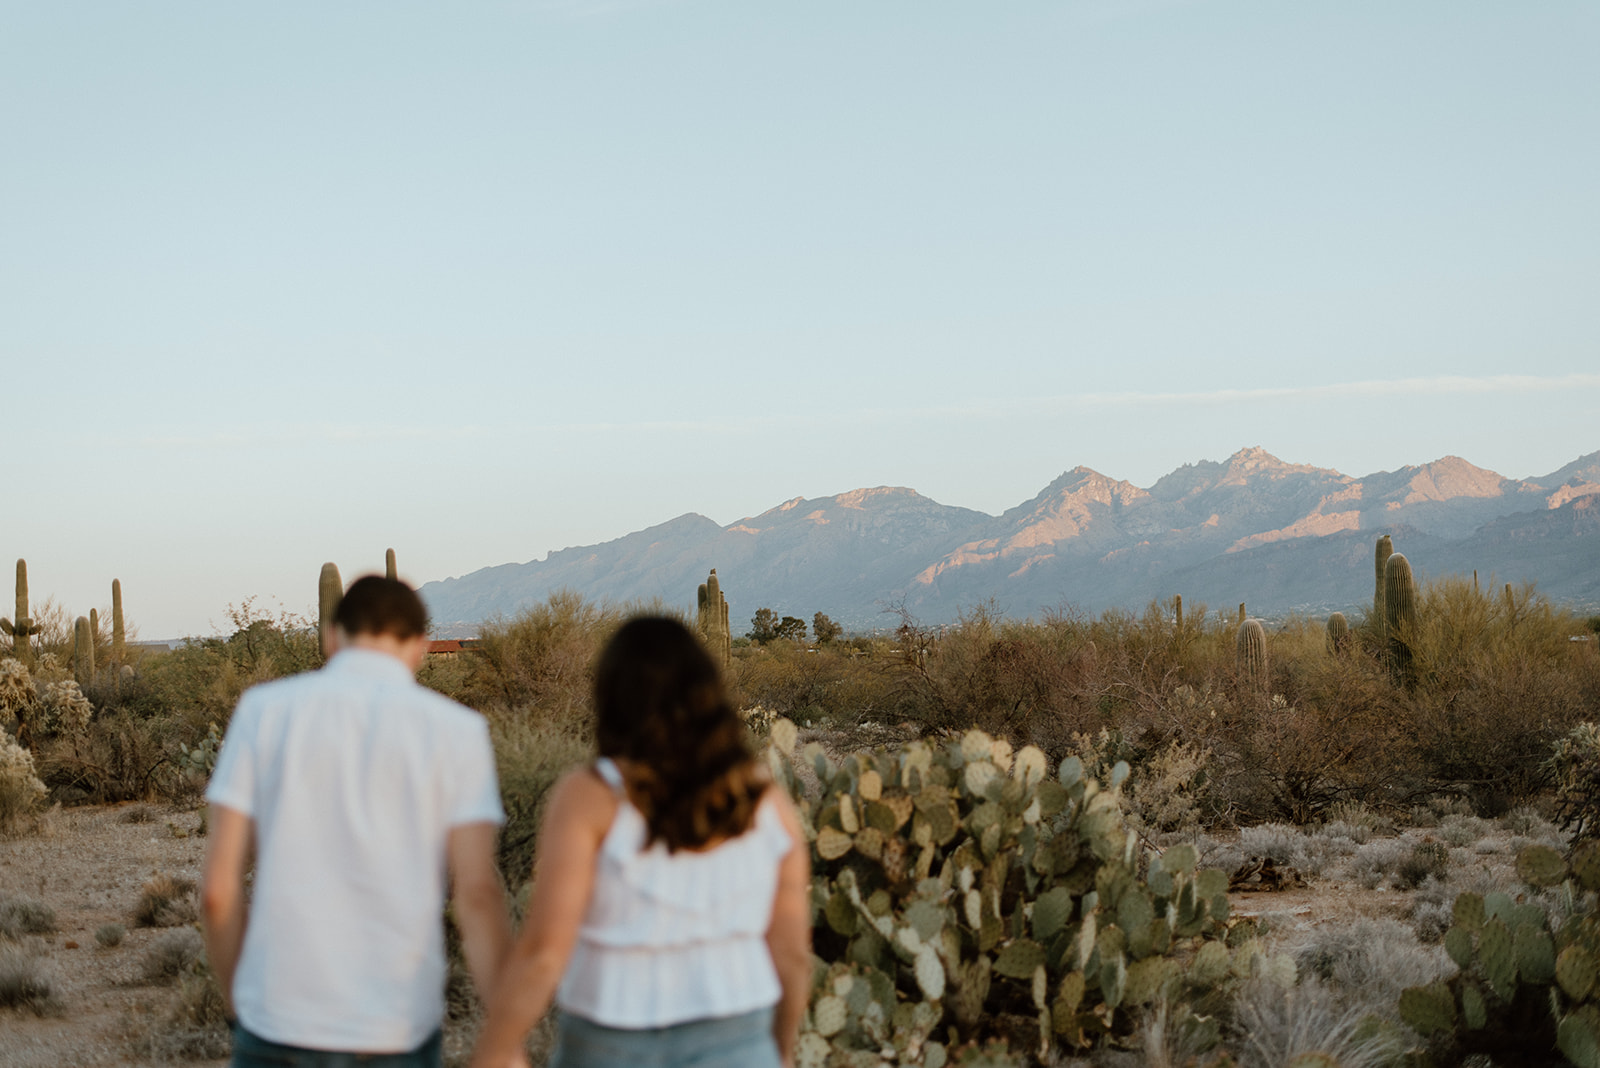 Couple walks holding hands at Tucson, Arizona content day